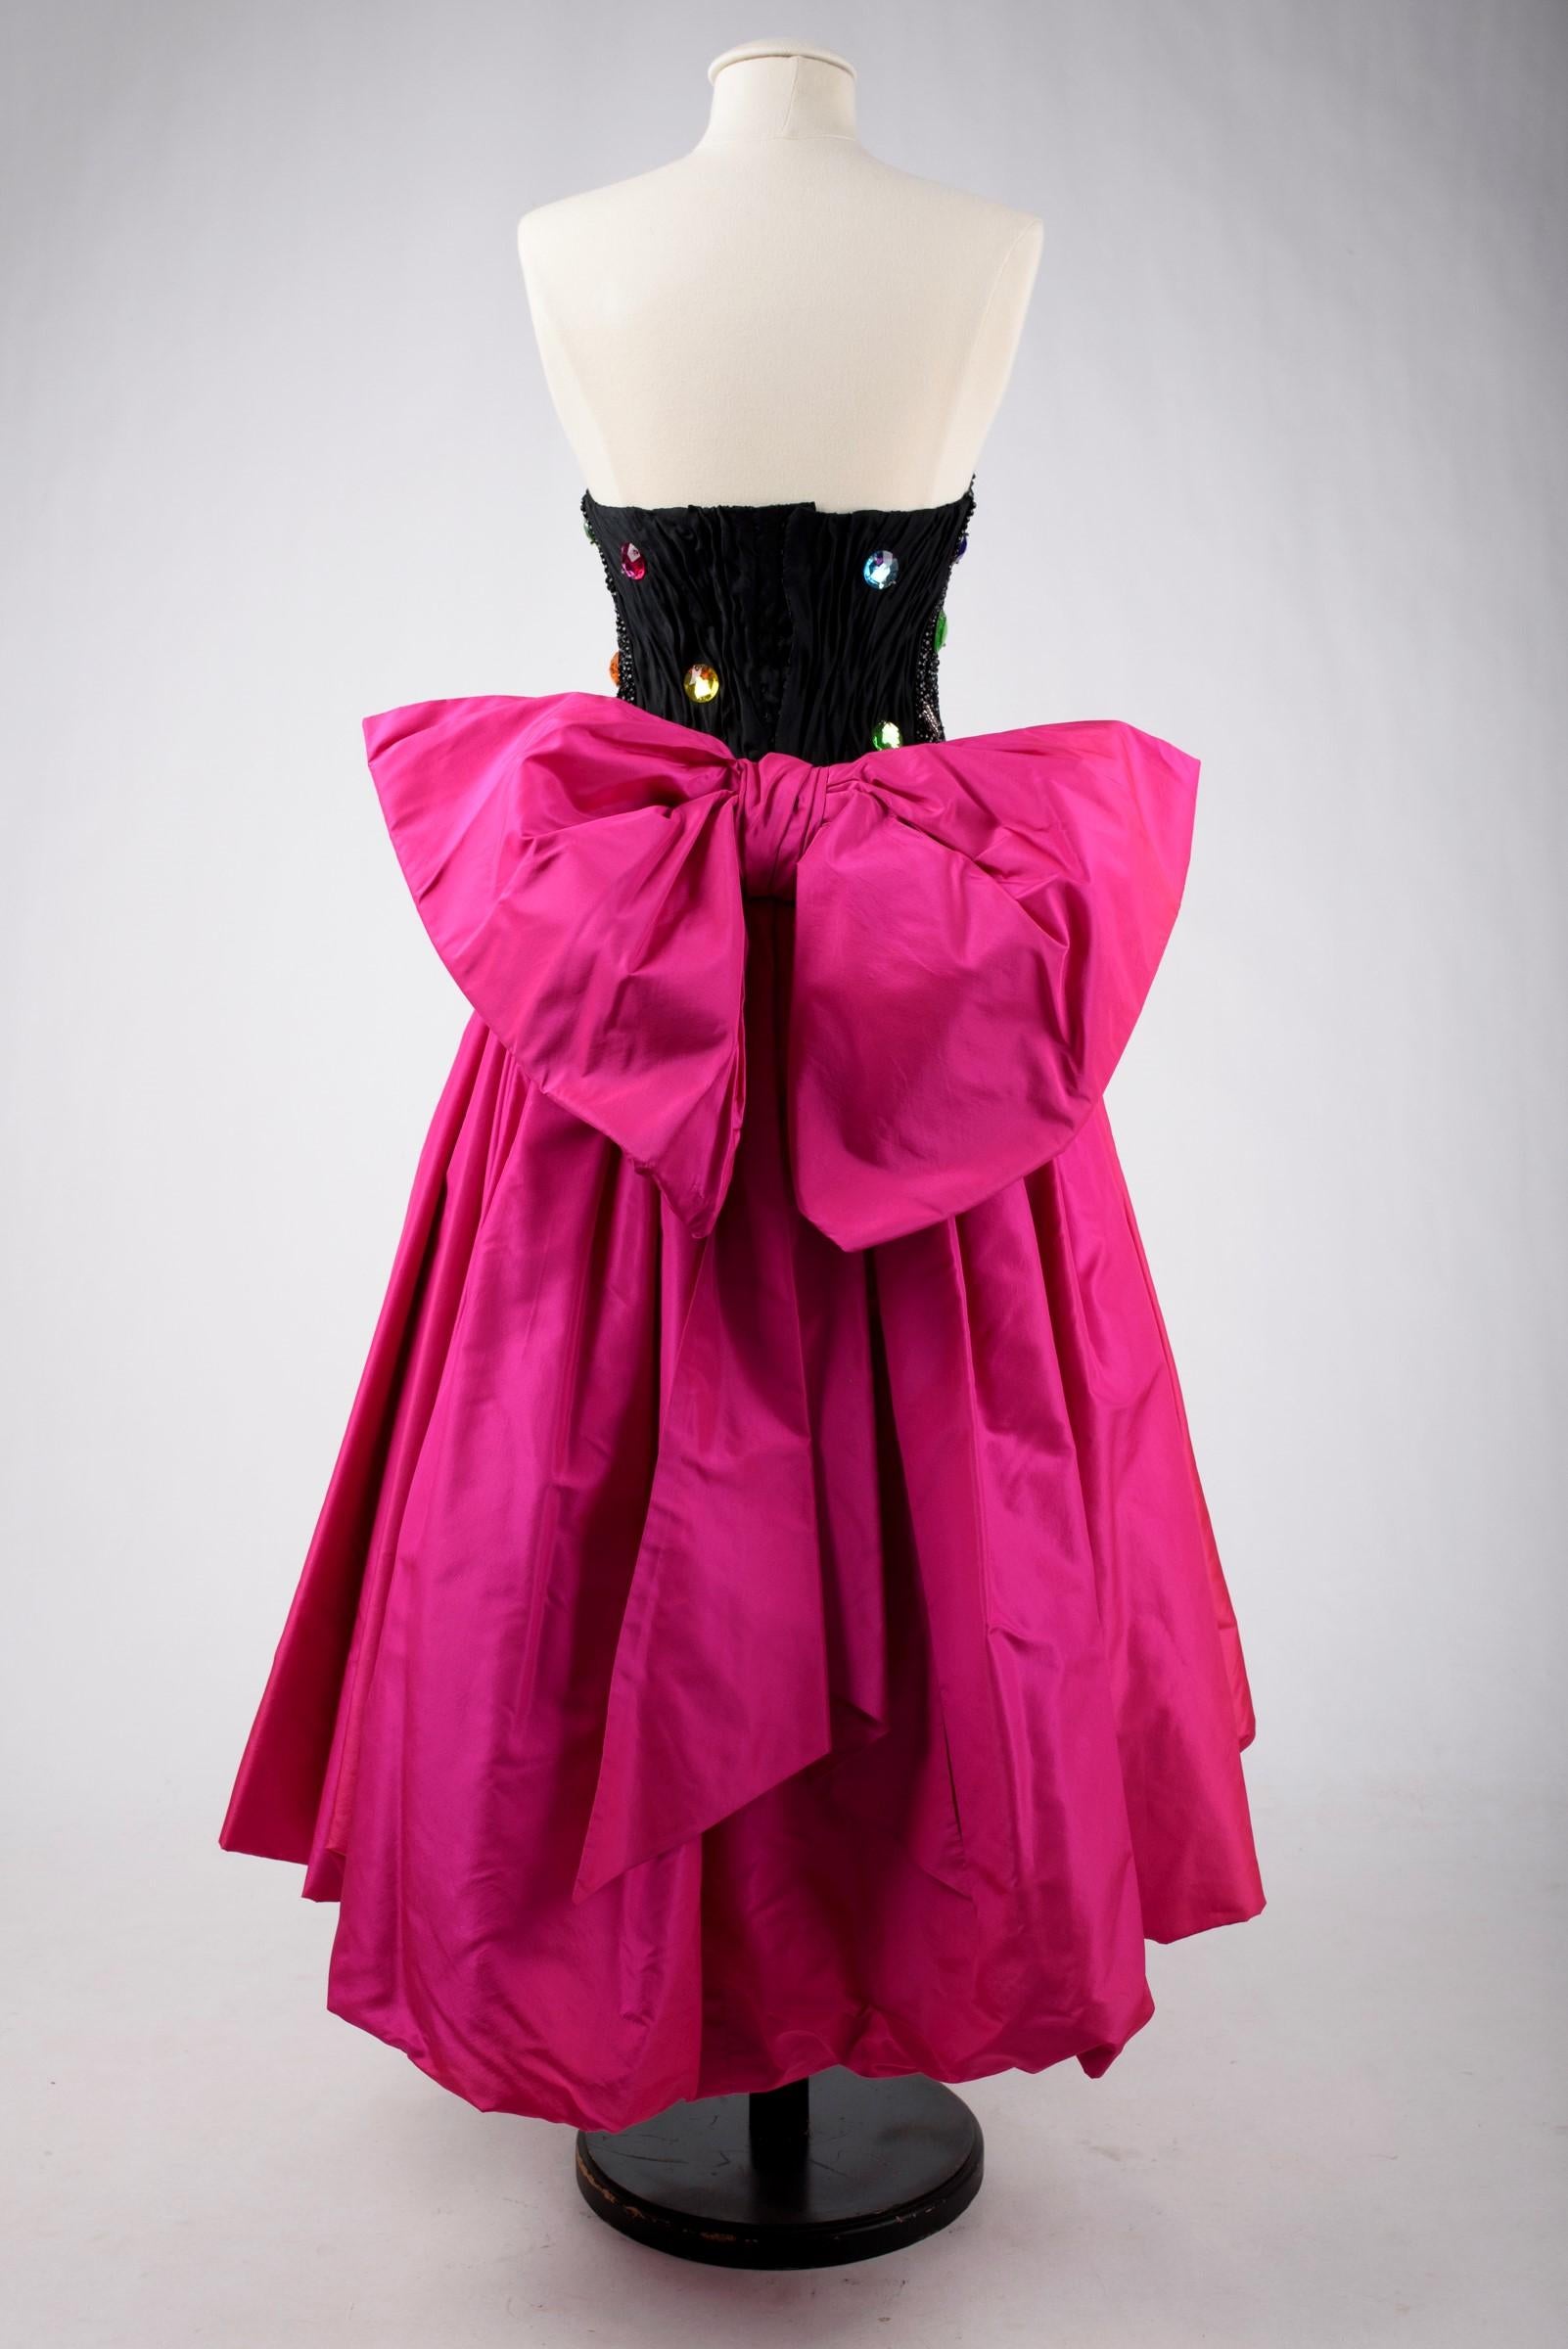 A Louis Féraud Couture Taffeta Evening Dress with beaded Bodice-Fall 1986-1987 For Sale 7